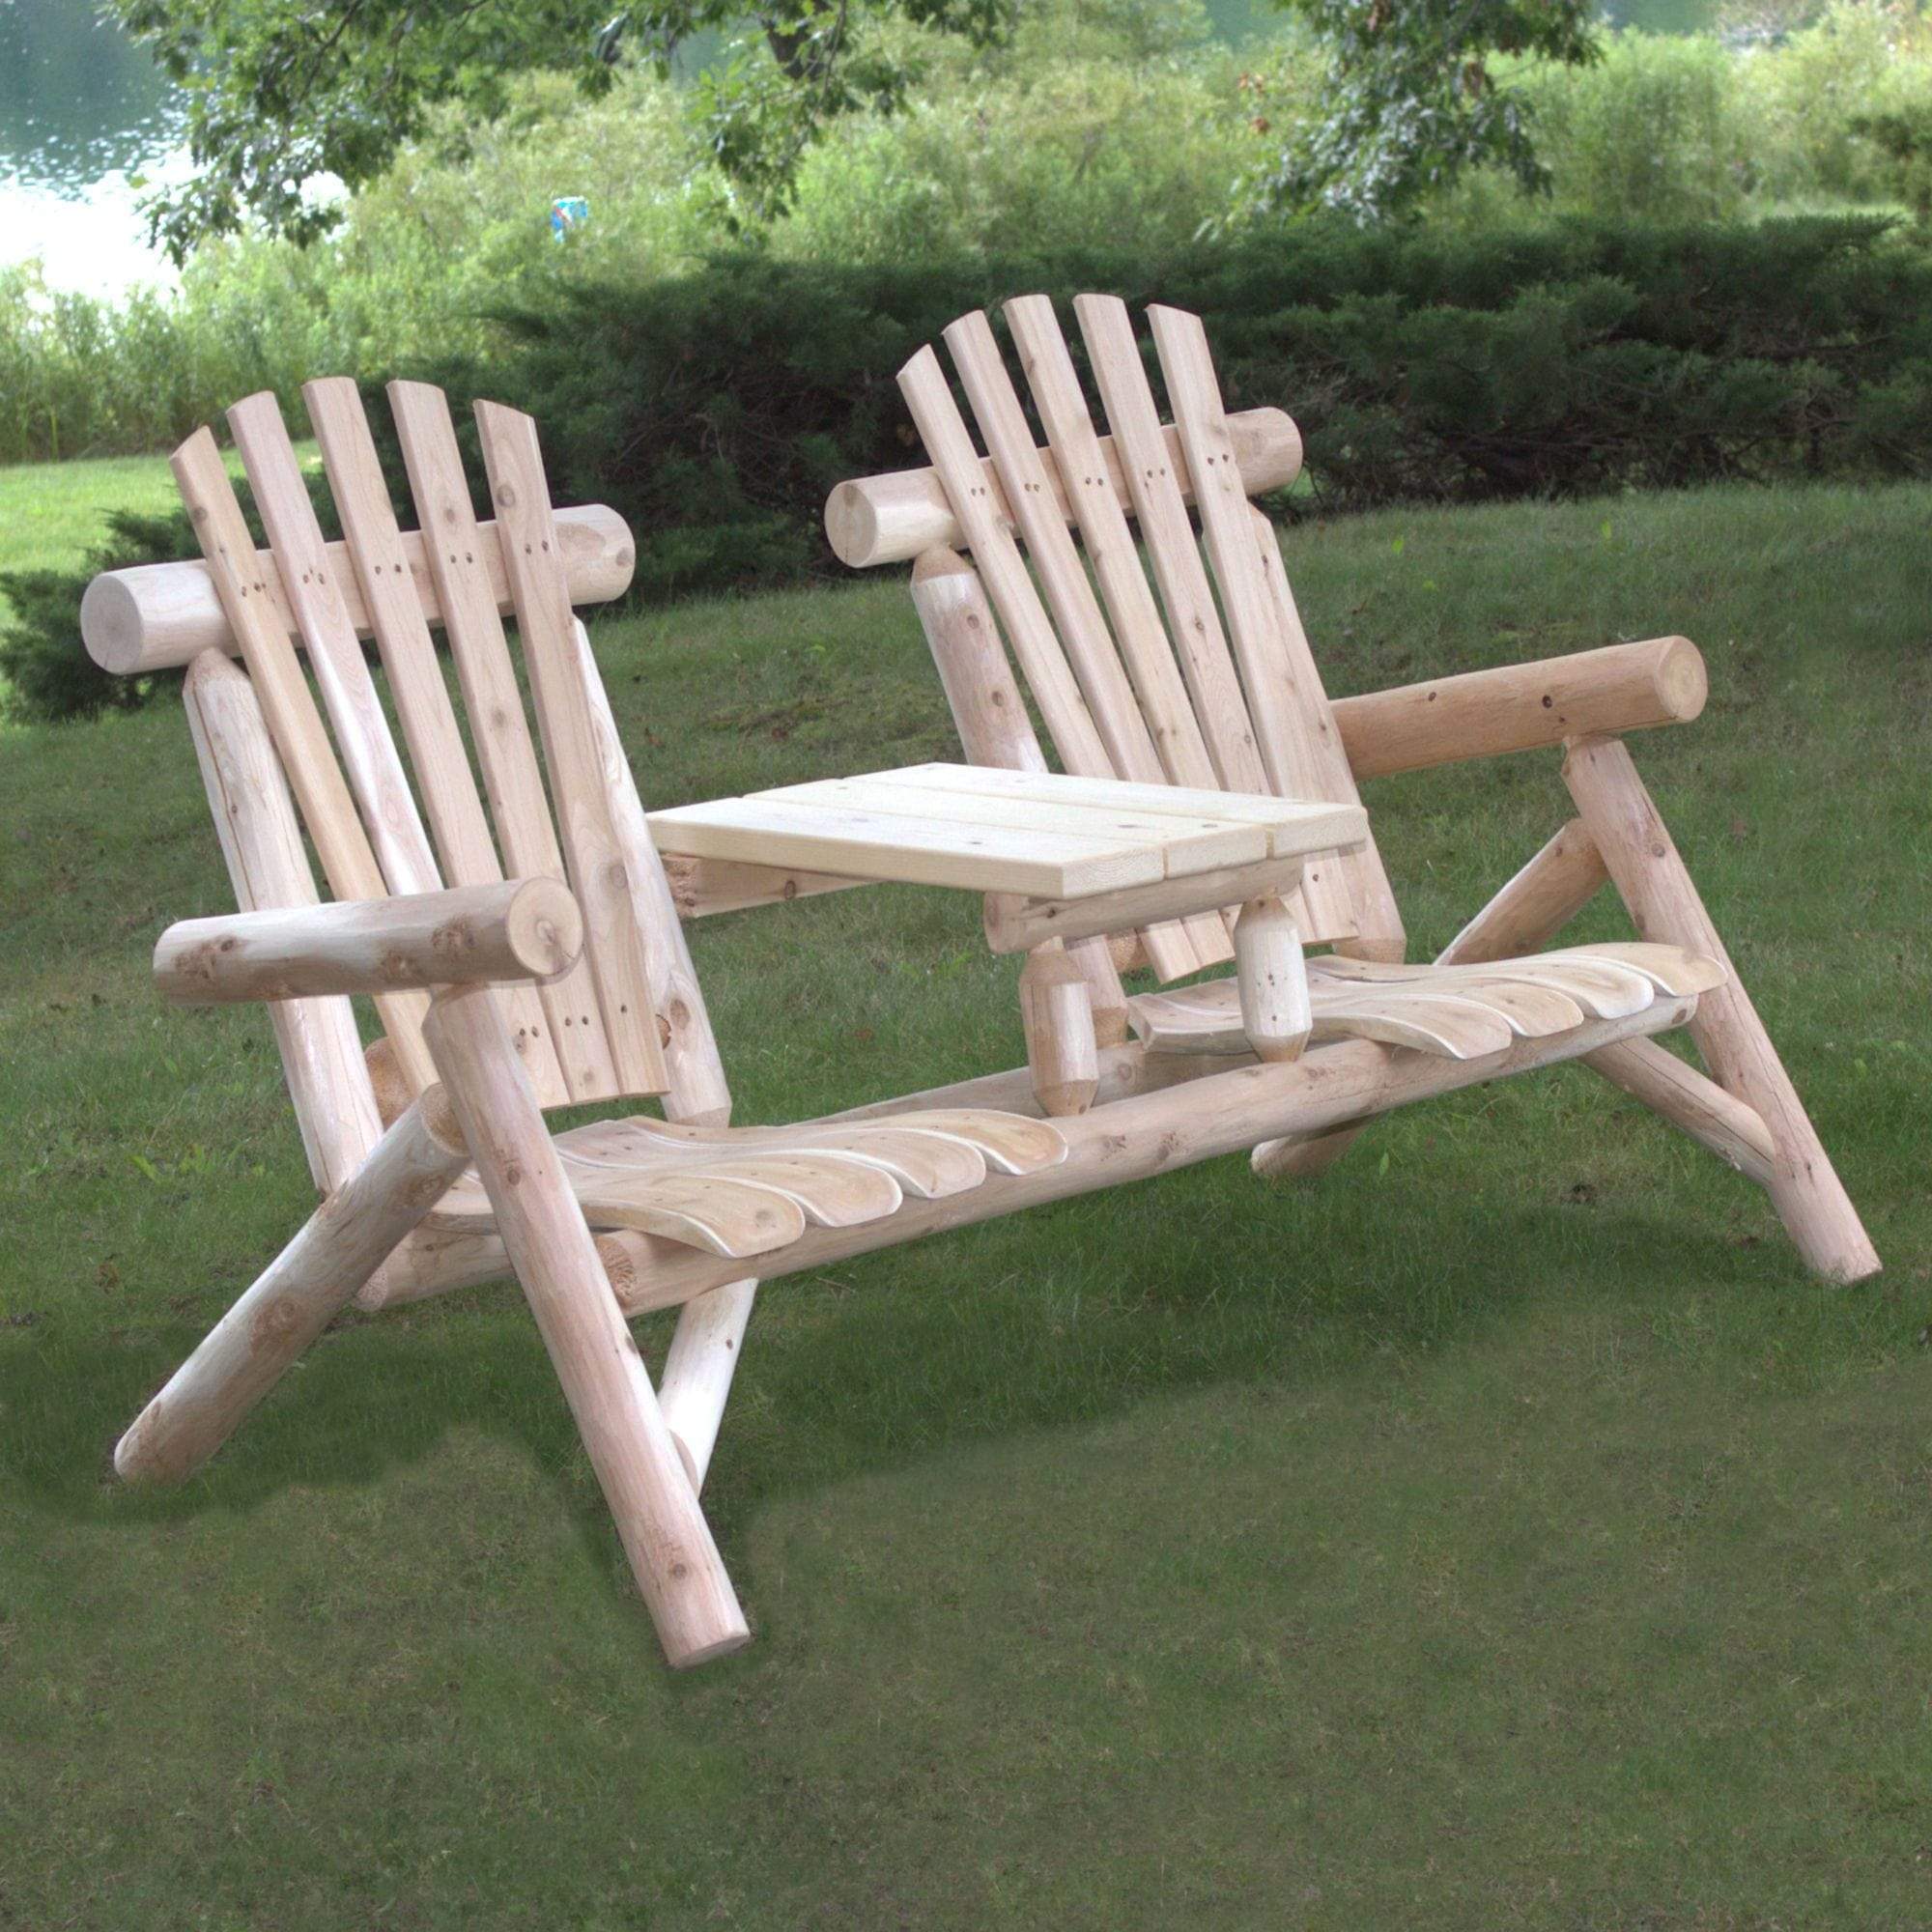 HomeRoots Outdoors Outdoor Chairs Natural / Wood 66" X 30" X 39"  Natural Wood Tete-A-Tete Chair